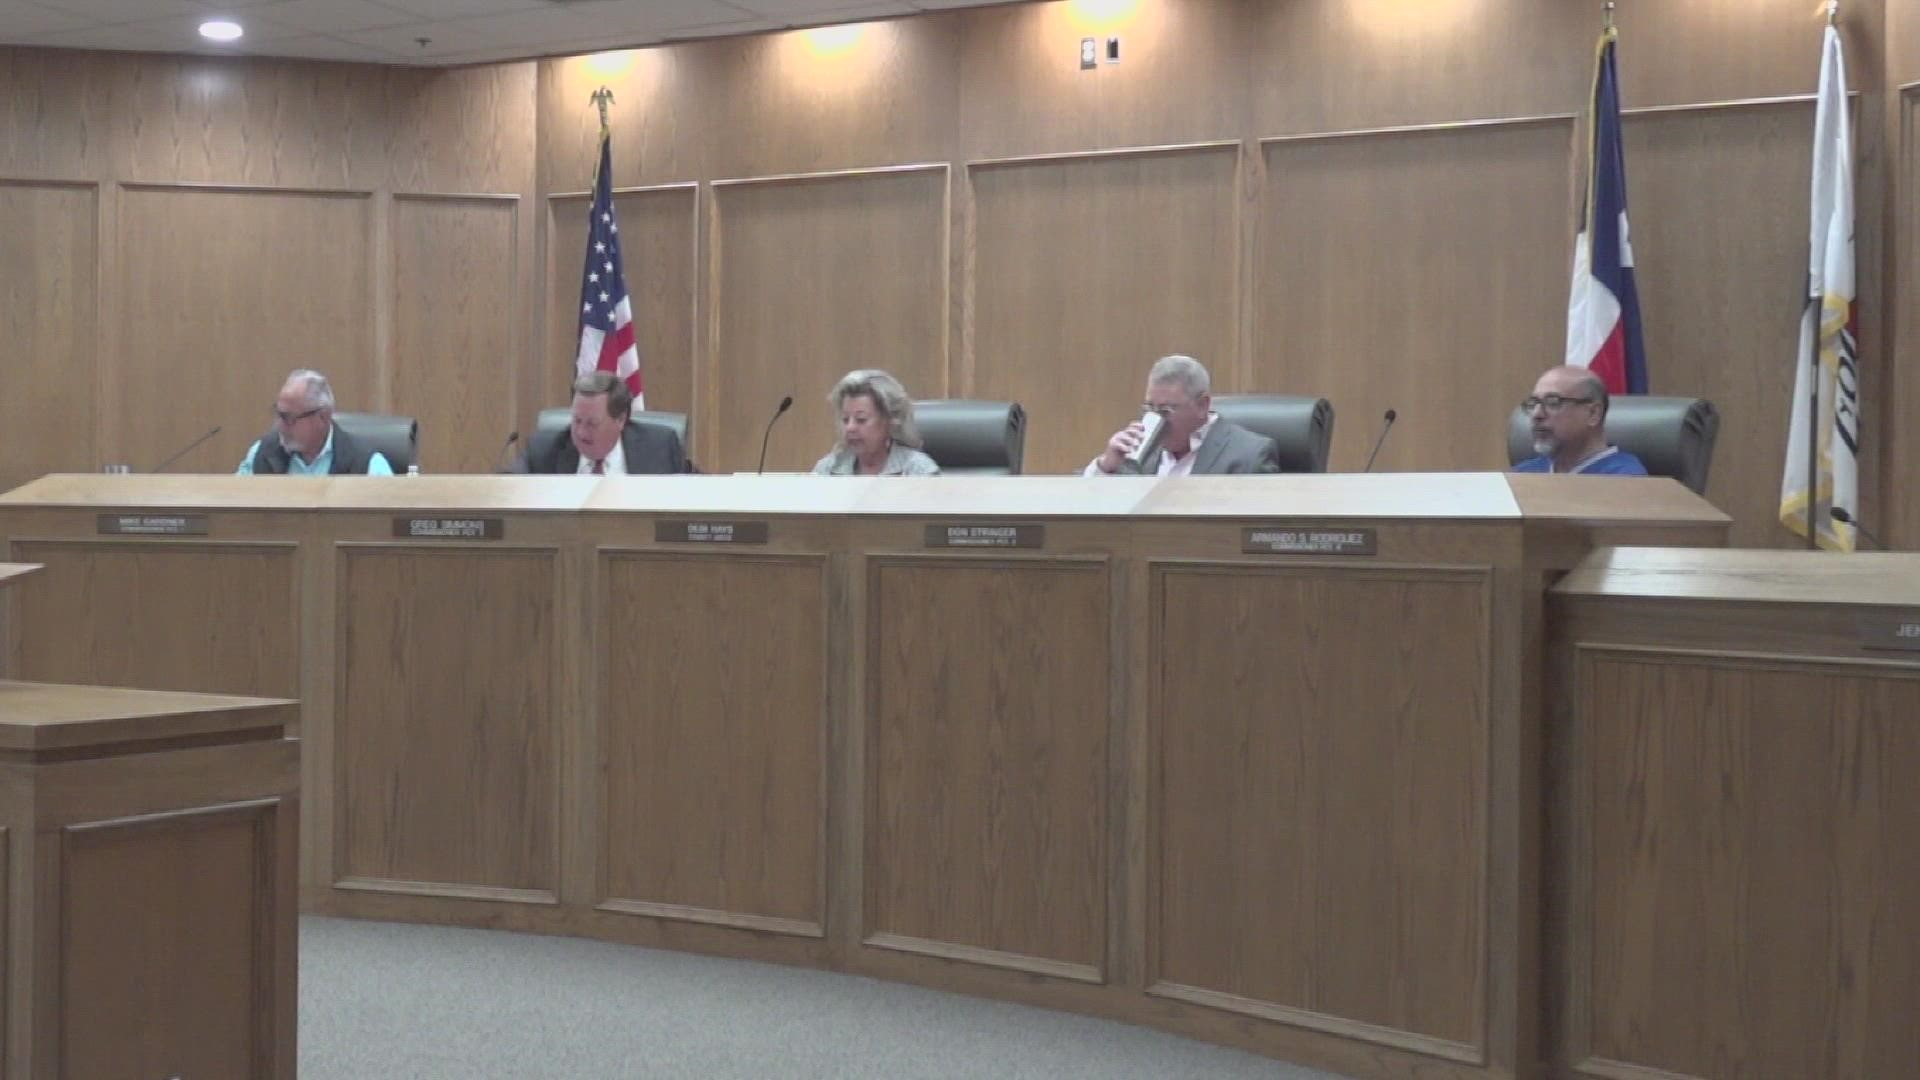 ConnEctor Taskforce hopes to get funding for Ector County Broadband Plan.